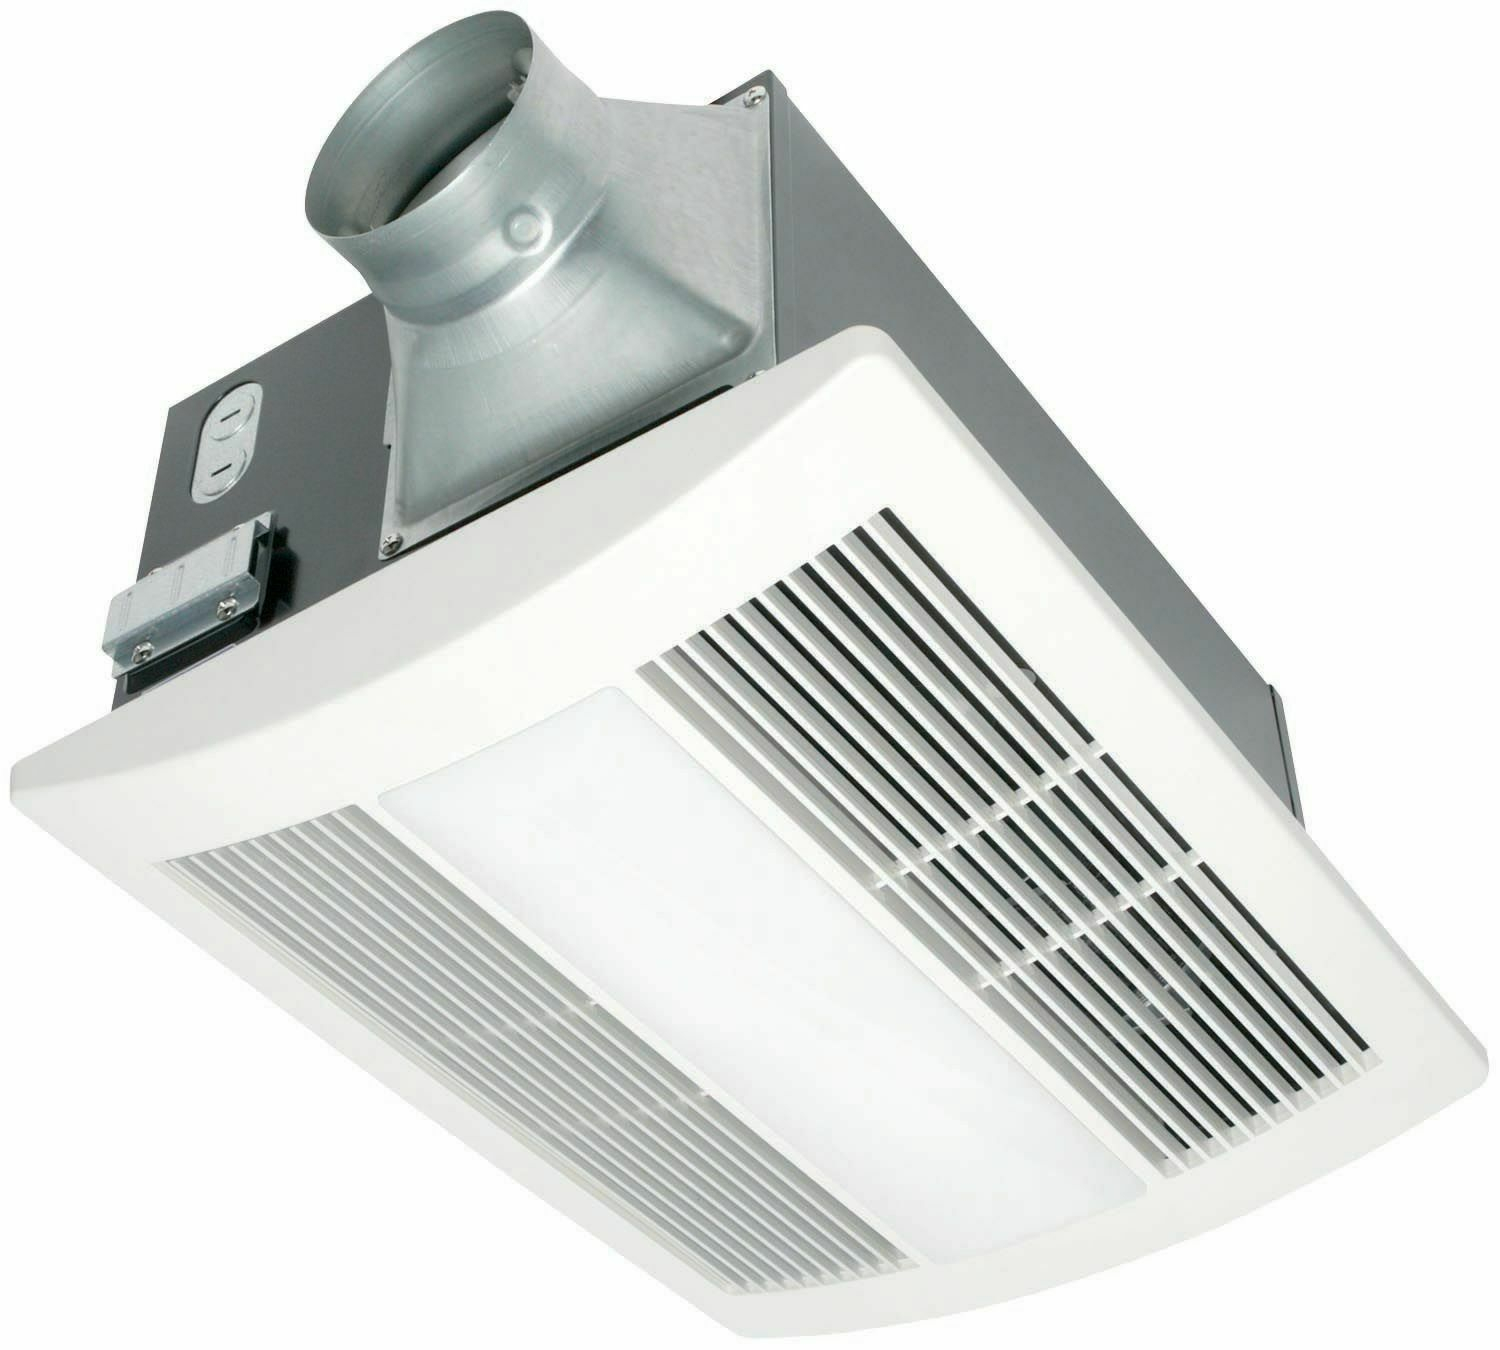 Panasonic Fv 11vhl2 Whisperwarm 110 Cfm Ceiling Exhaust Fan With Light Heater within sizing 1500 X 1350